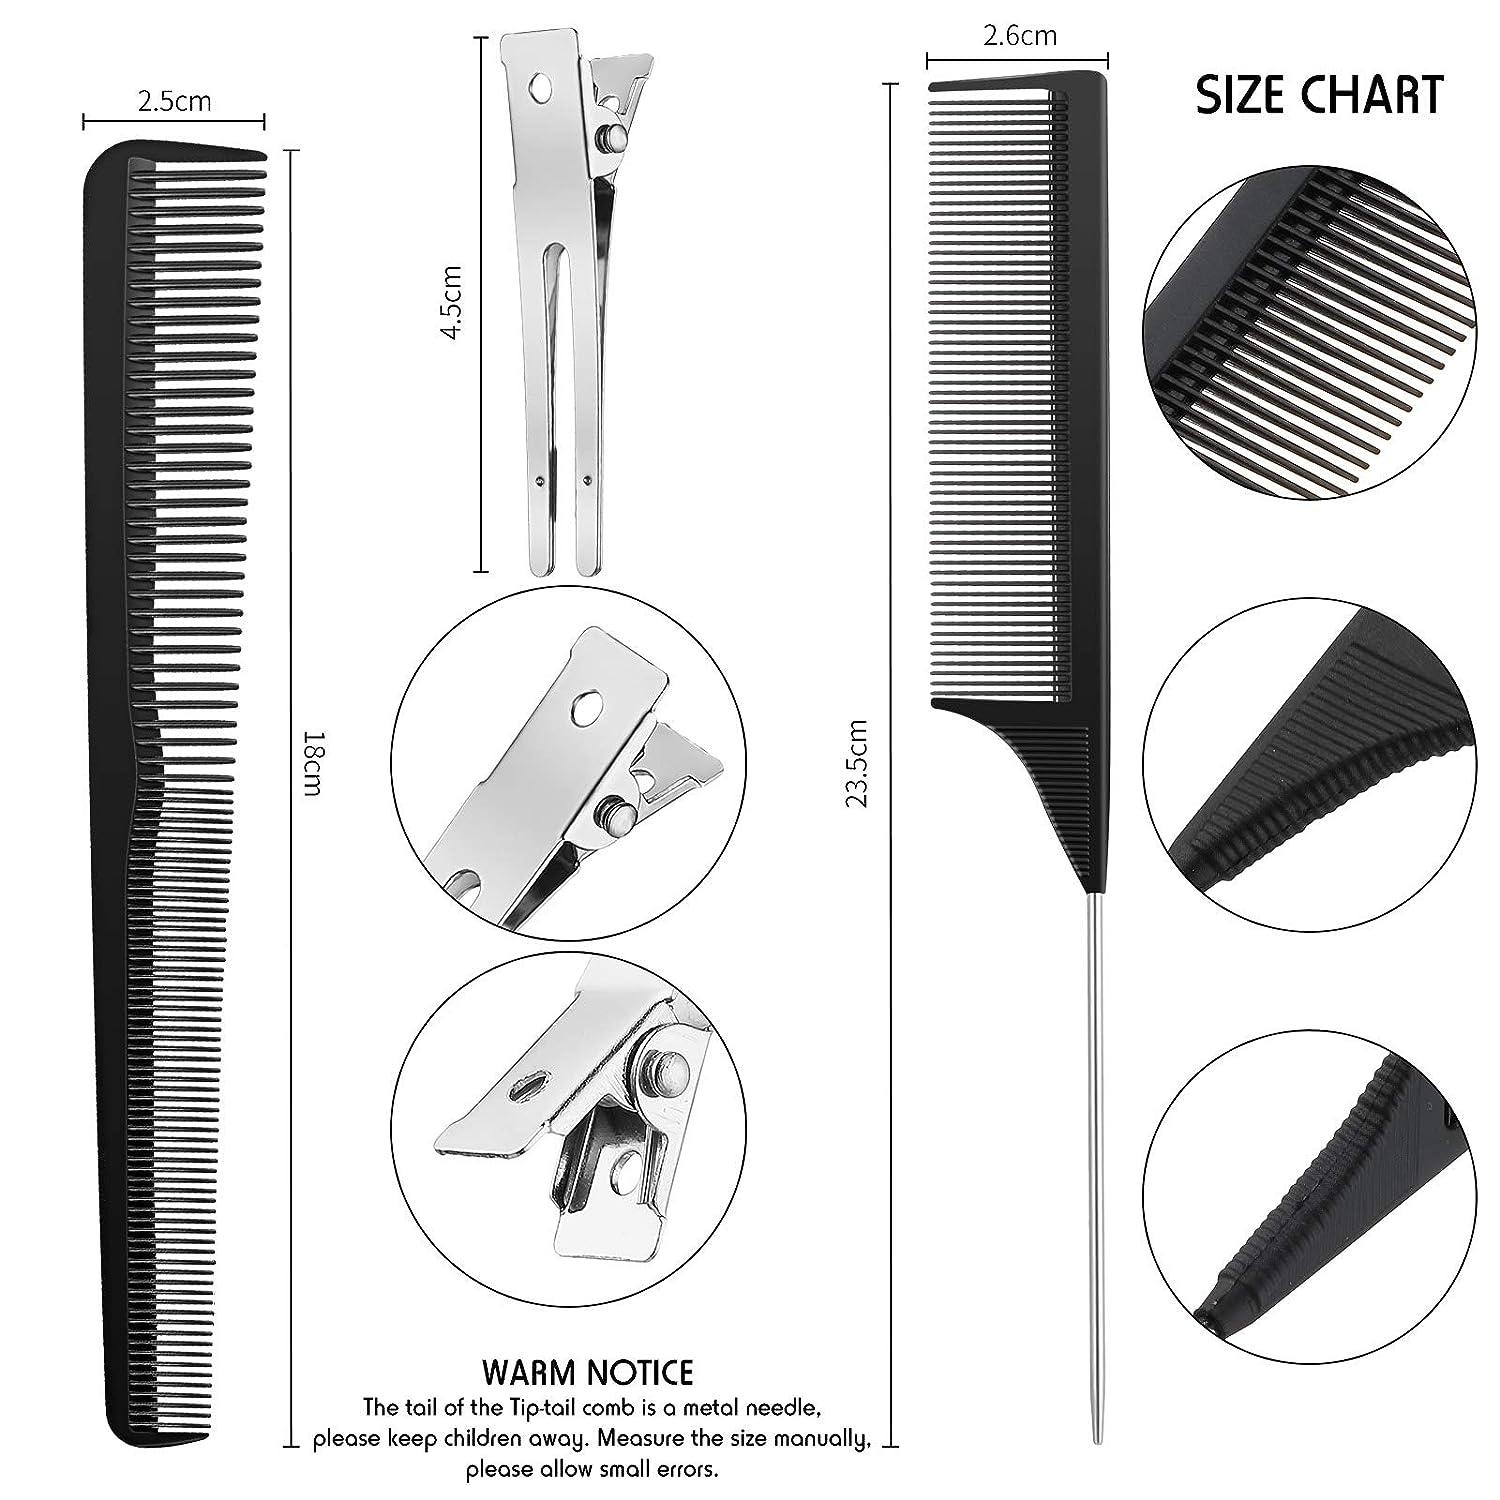 52 Pieces Hair Comb Set Locks Comb Dread Clips Includes Rat Tail Combs,  Taper Hair Comb and 50 Double Prong Curl Clips for Men and Women Wavy Curls